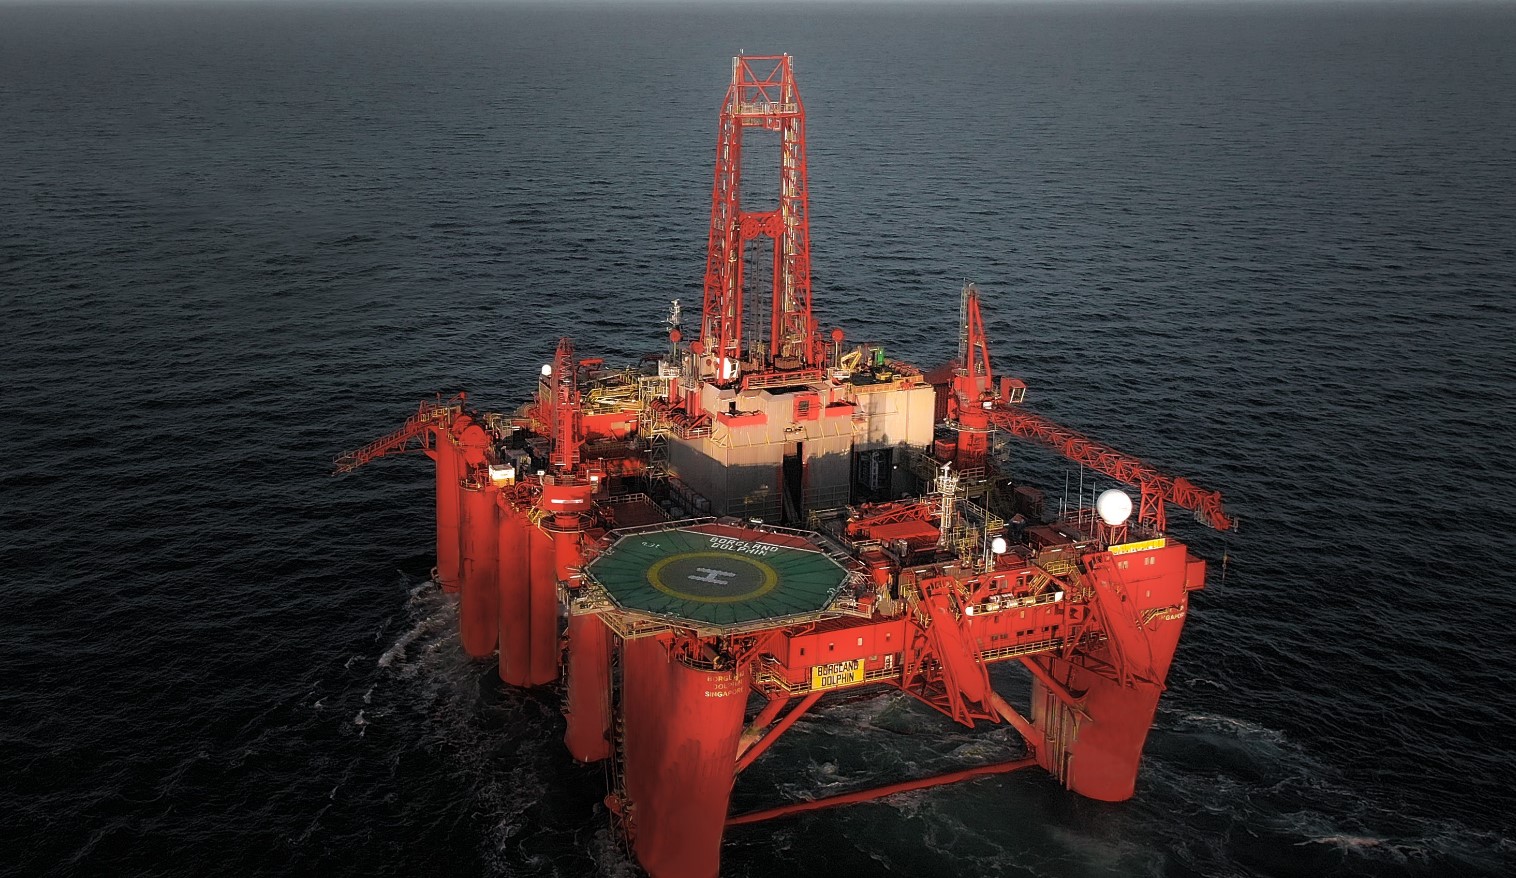 Borgland Dolphin; Source: Drilling Systems Dolphin Drilling Wellesley